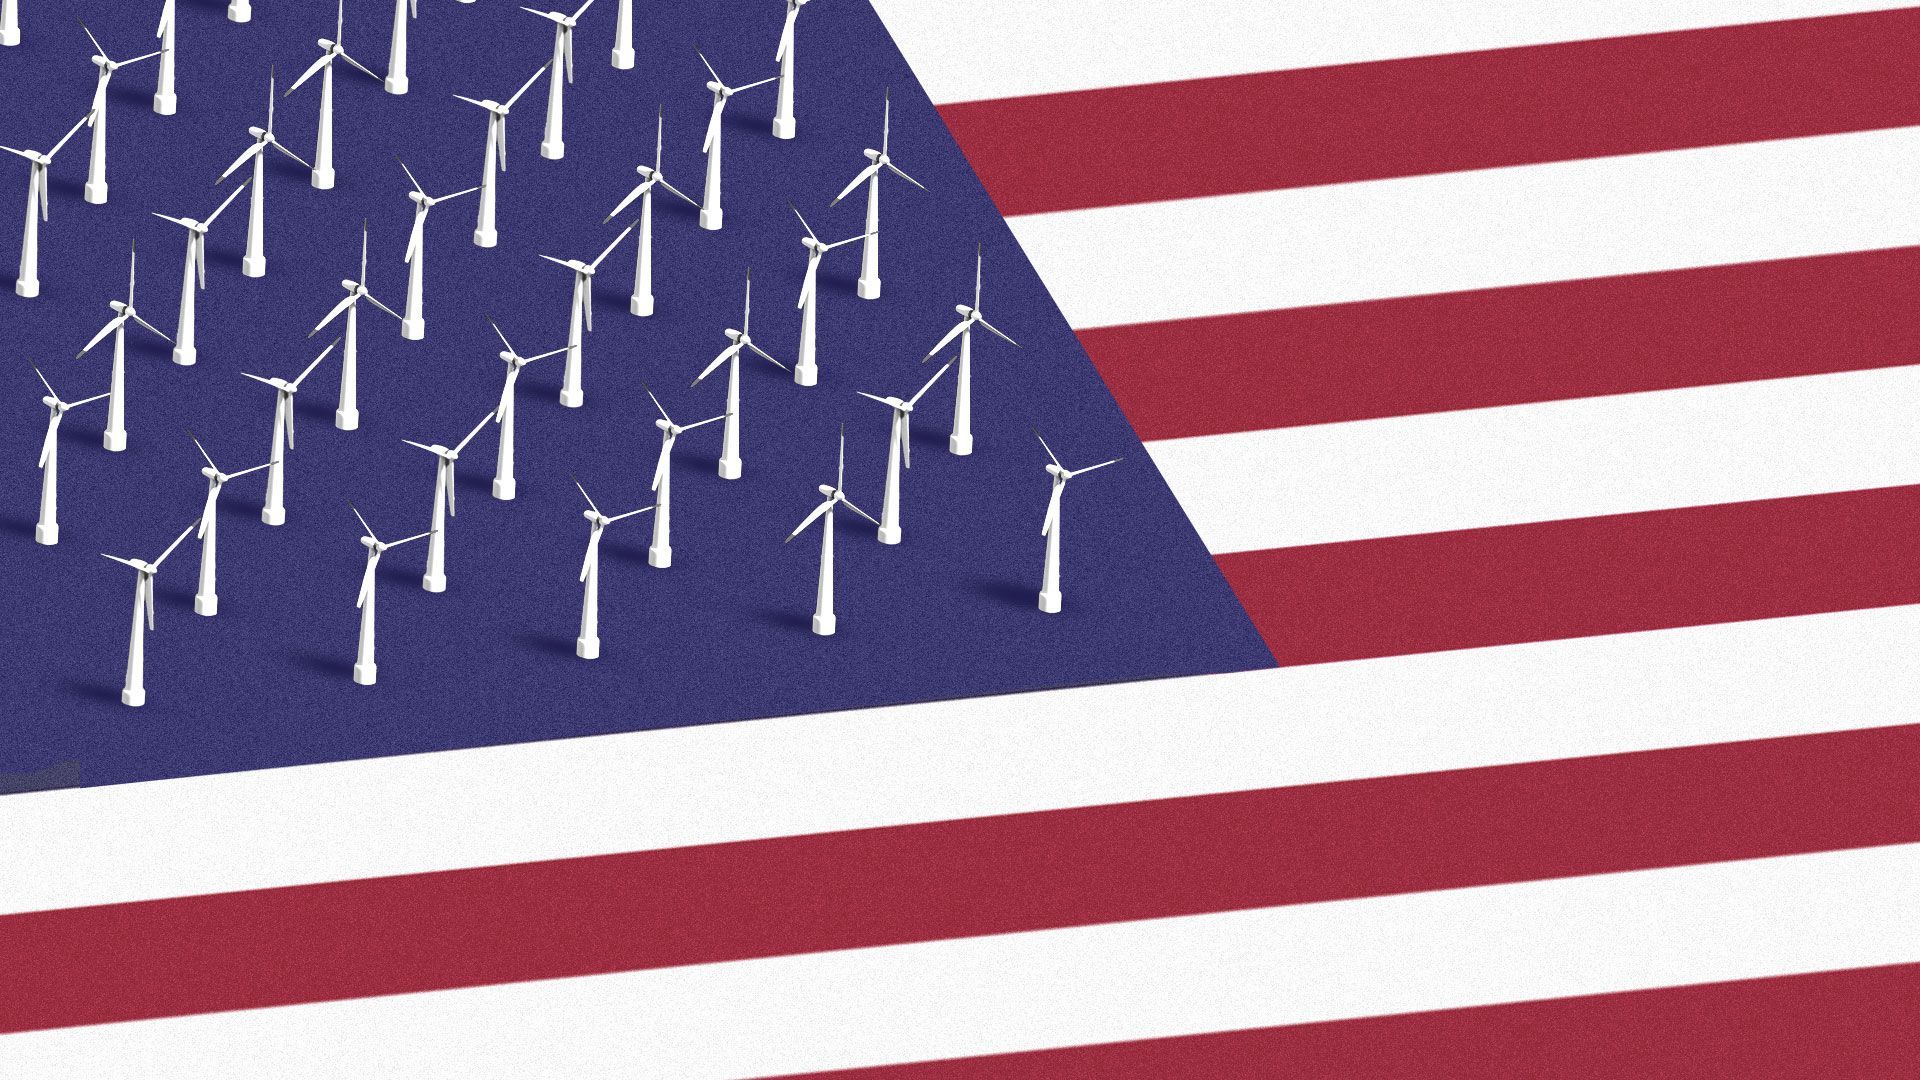 The stars in the U.S. flag replaced by offshore wind turbines